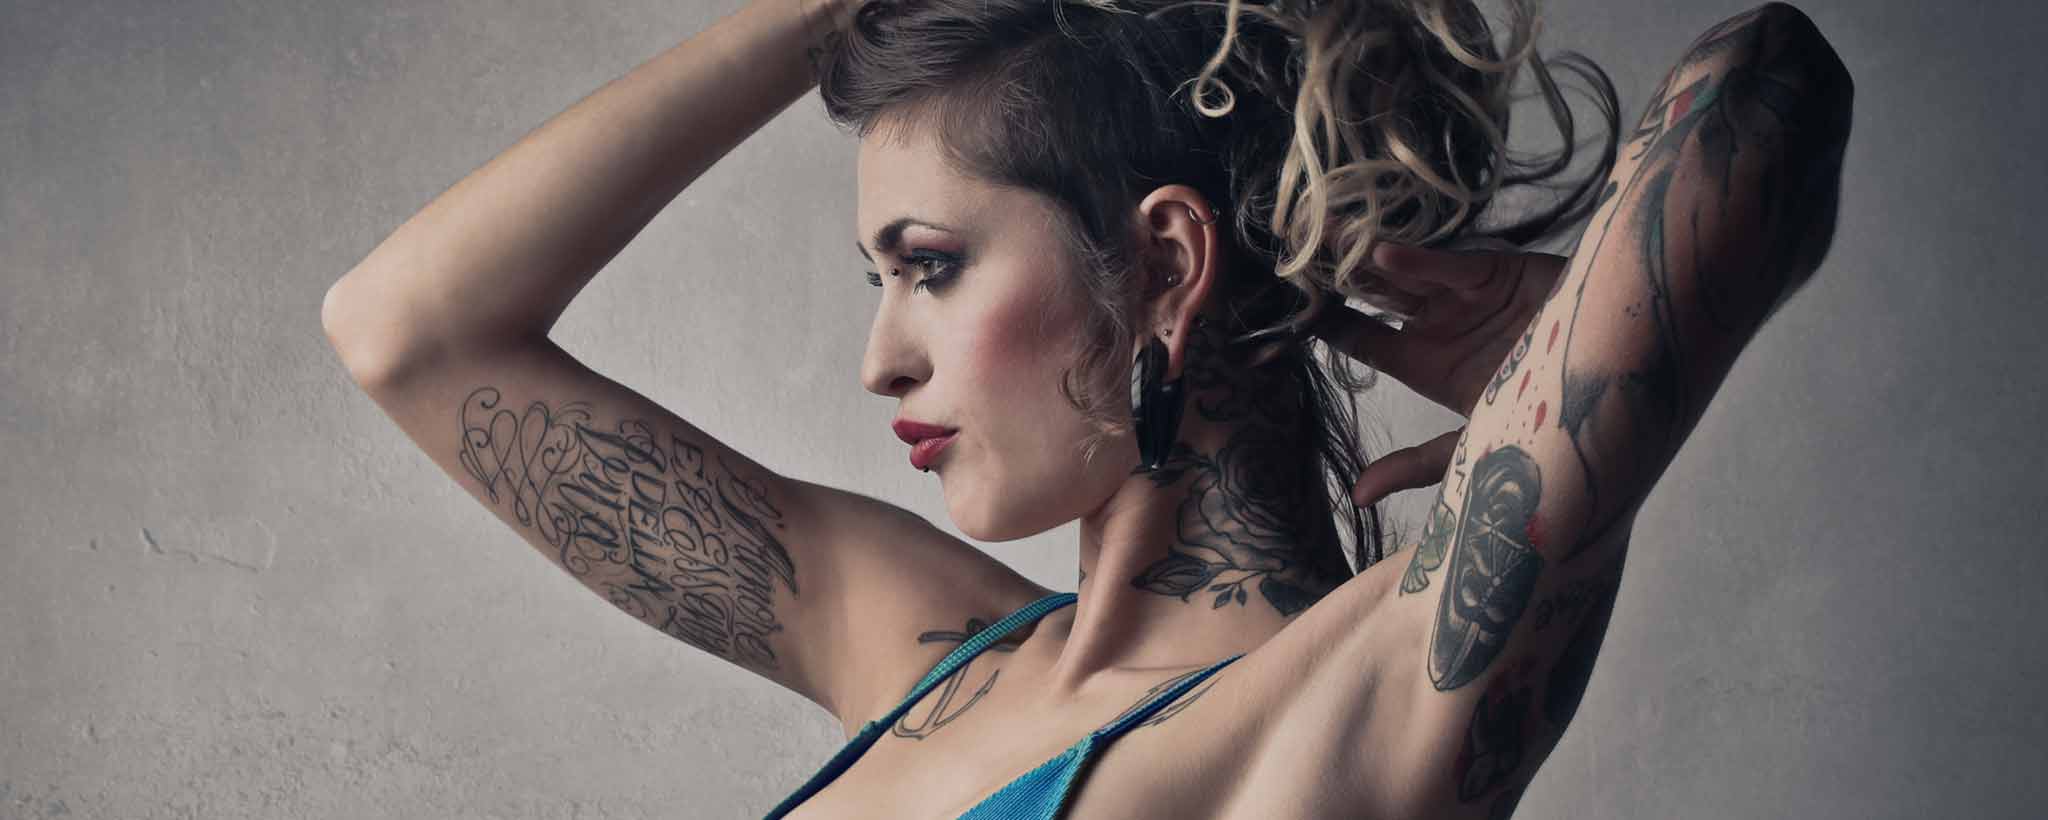 'Female with tattoos'